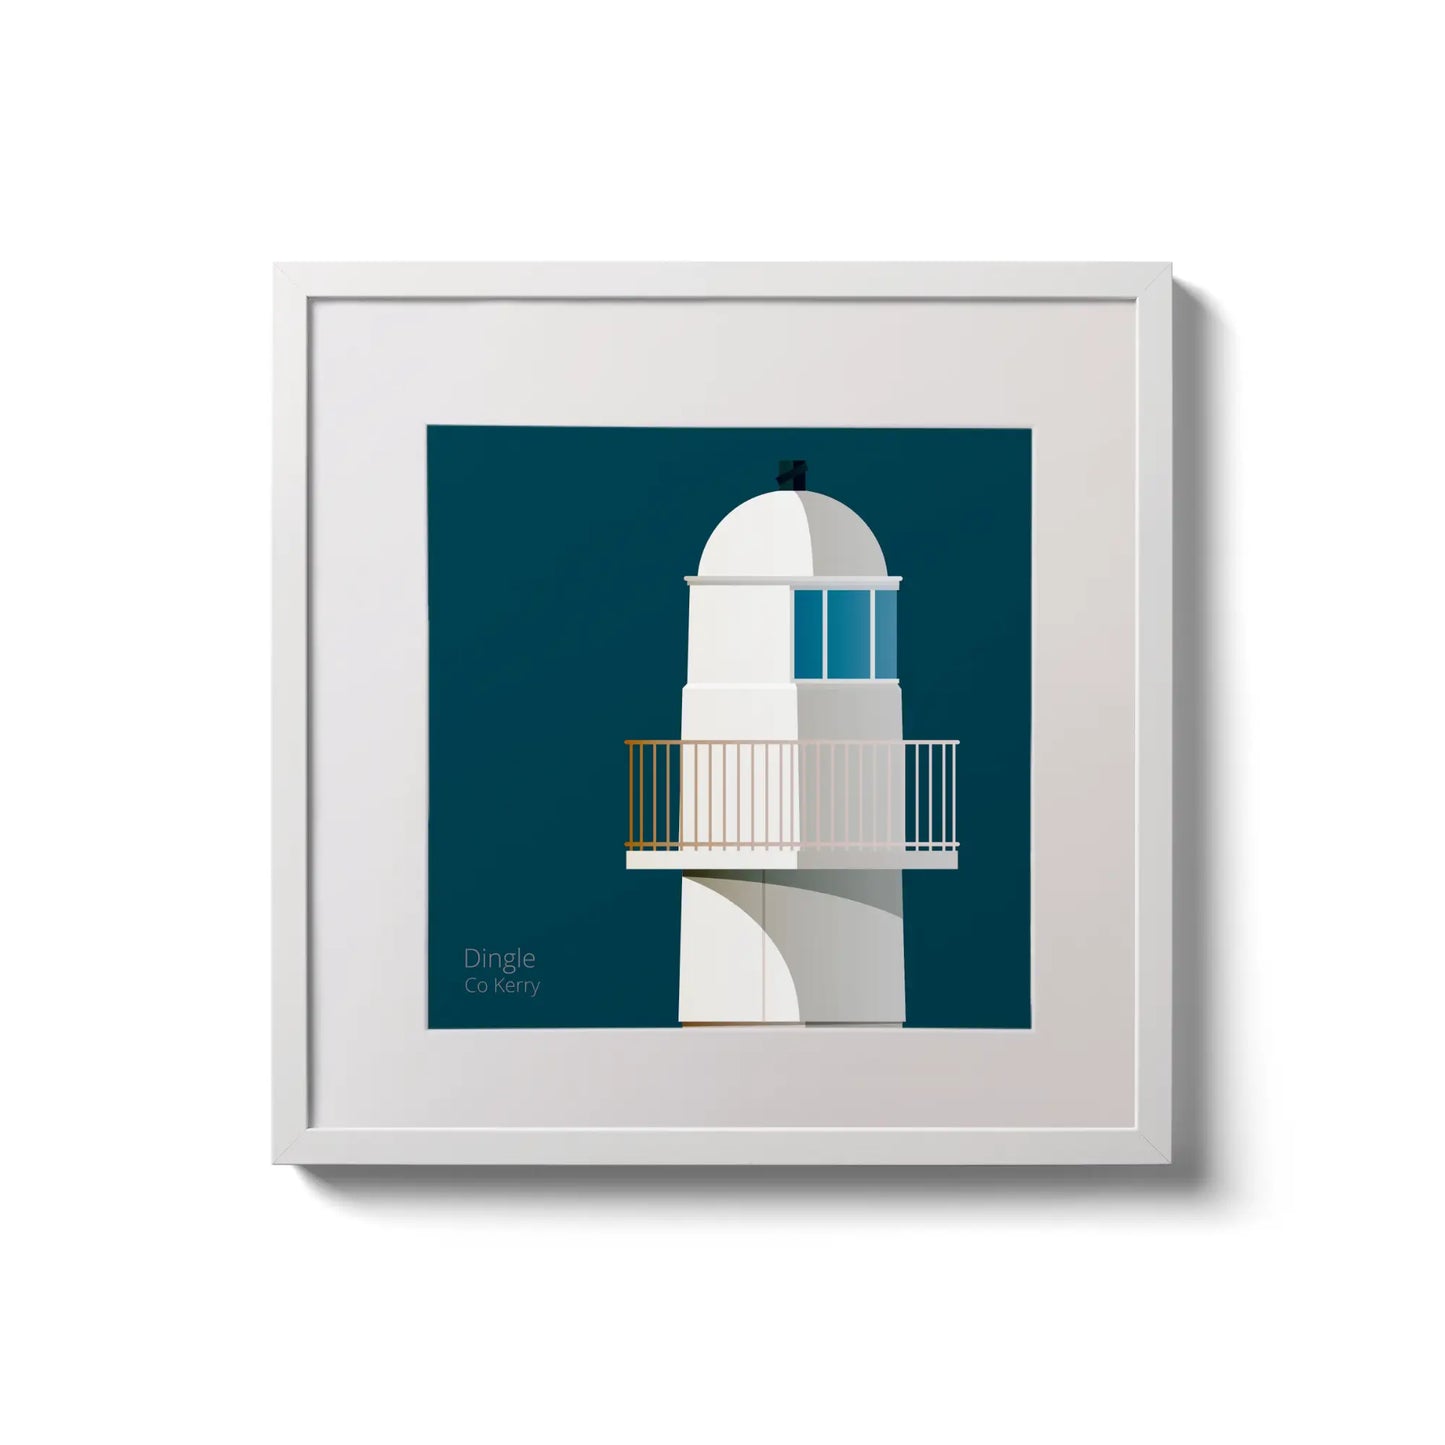 Illustration of Dingle lighthouse on a midnight blue background,  in a white square frame measuring 20x20cm.